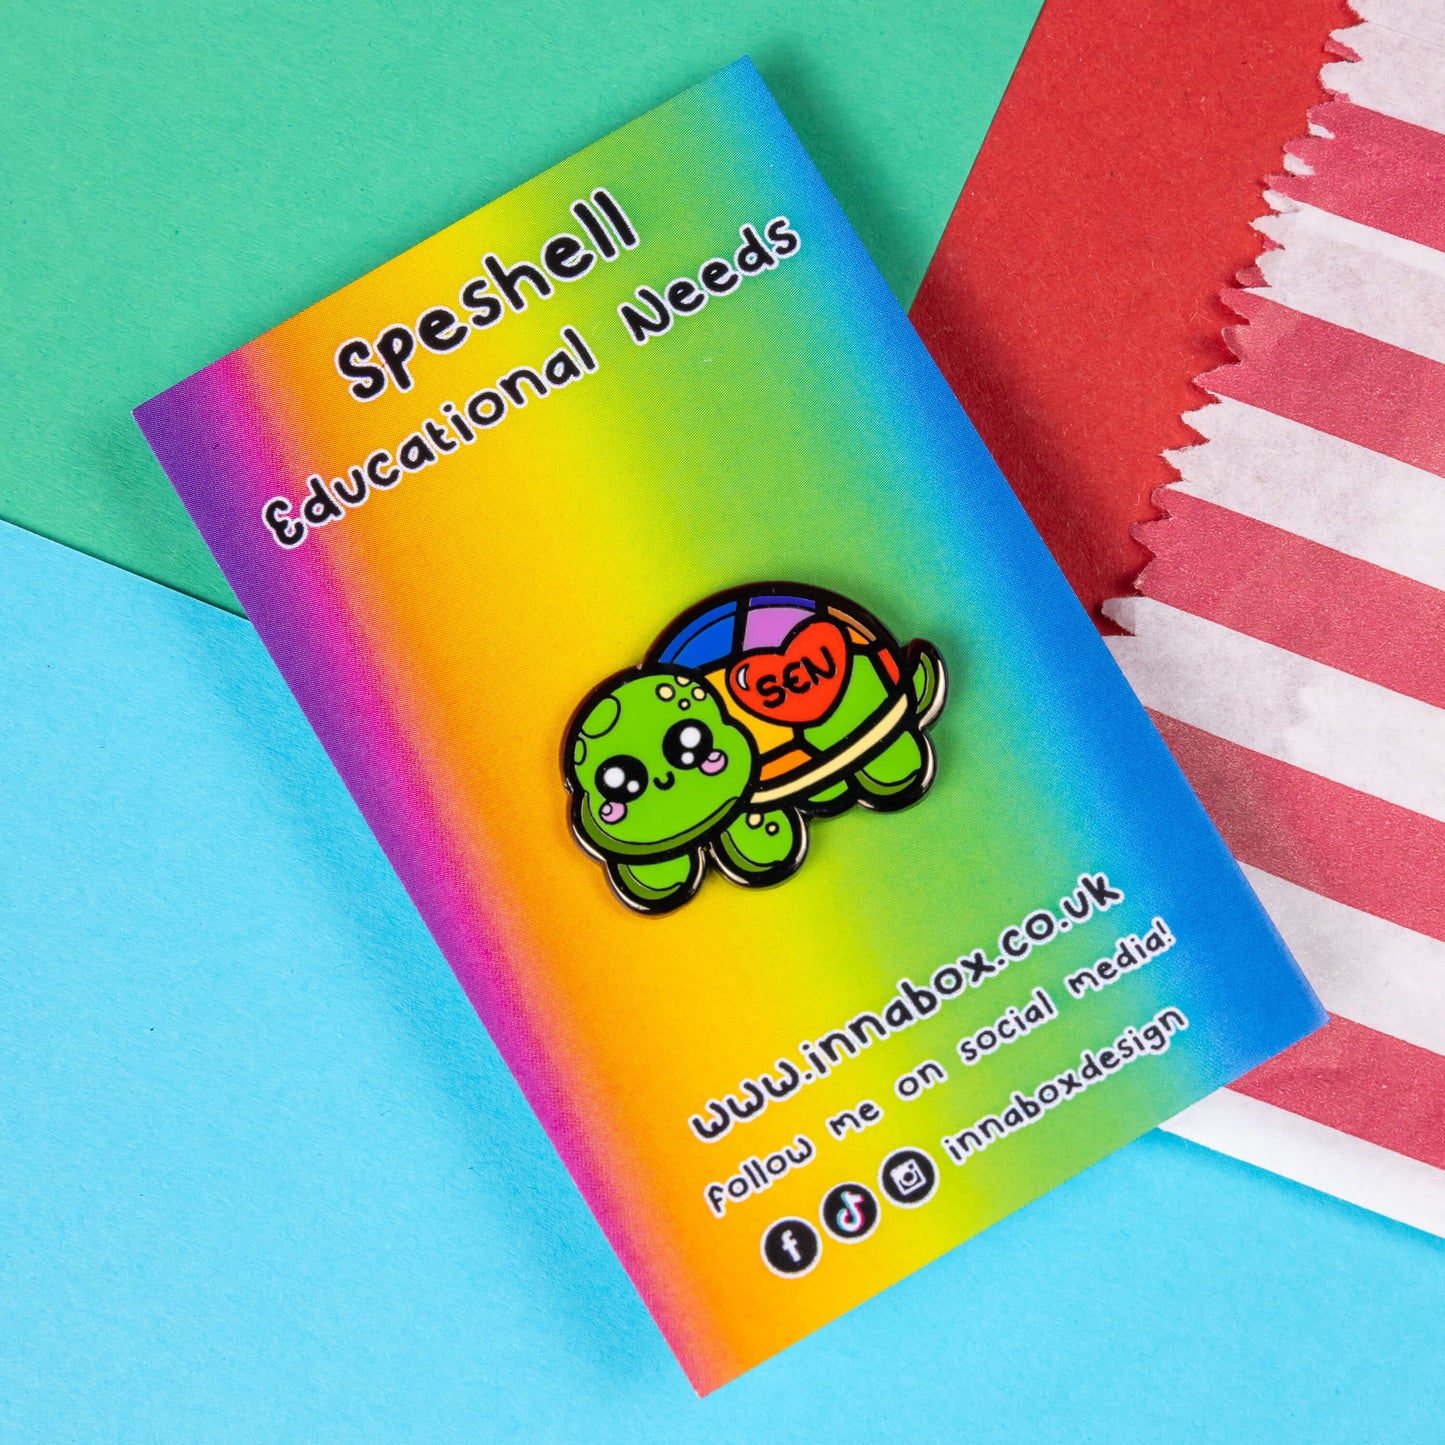 The Speshell Educational Needs Enamel Pin - SEN - Special Educational Needs on a rainbow backing card with black text. A rainbow shell kawaii cute style tortoise with pink cheeks and sparkling eyes, on its shell is a red heart with 'SEN' in the middle. The pin design is raising awareness for SEN Special Educational Needs.